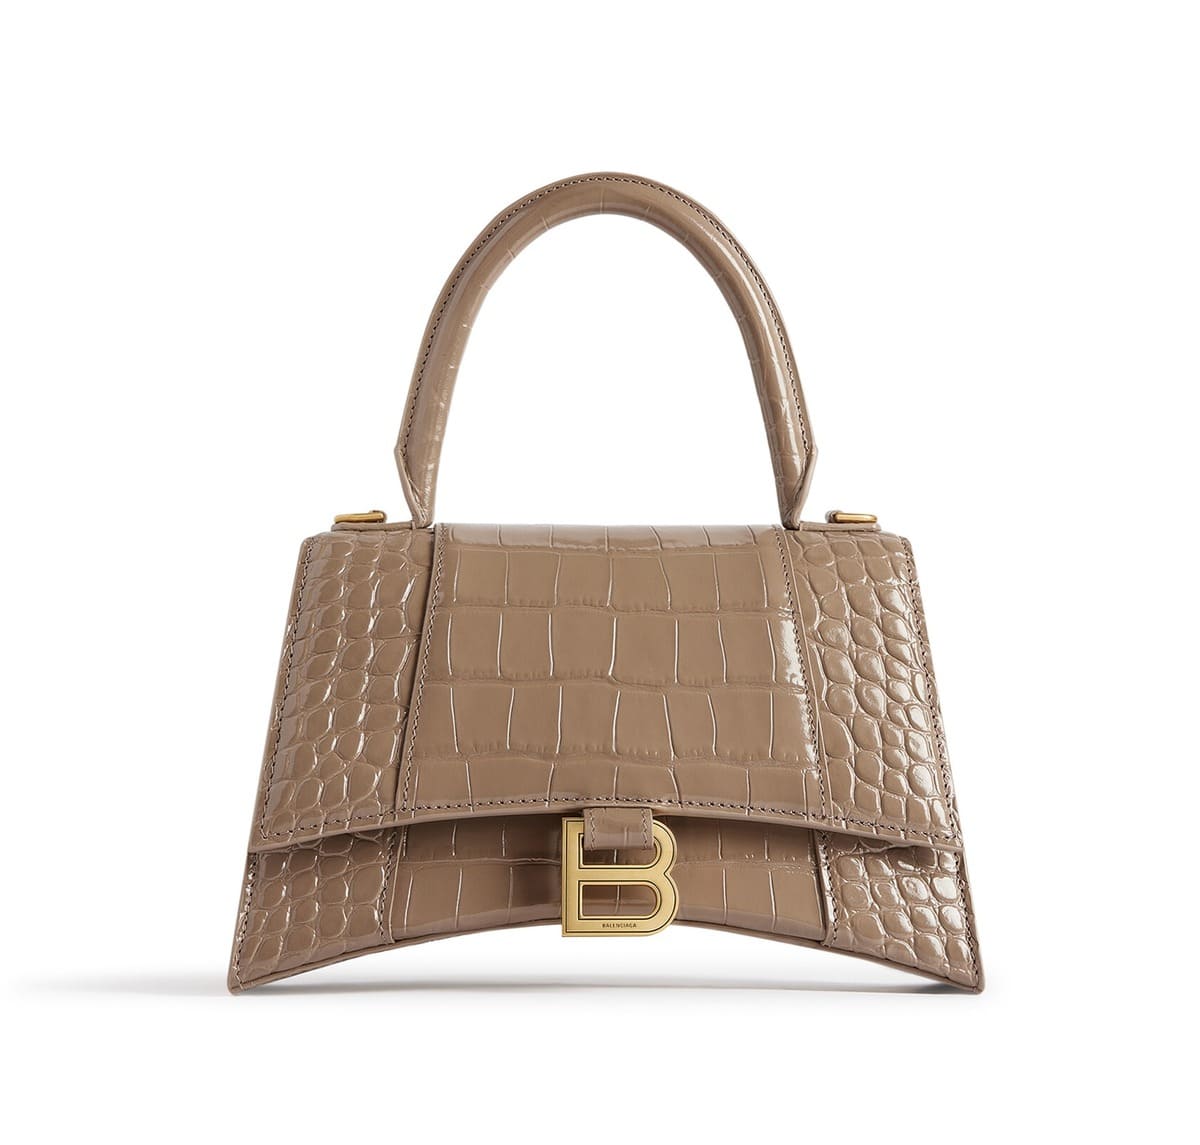 Balenciaga Hourglass Small Bag in Croc Embossed light brown